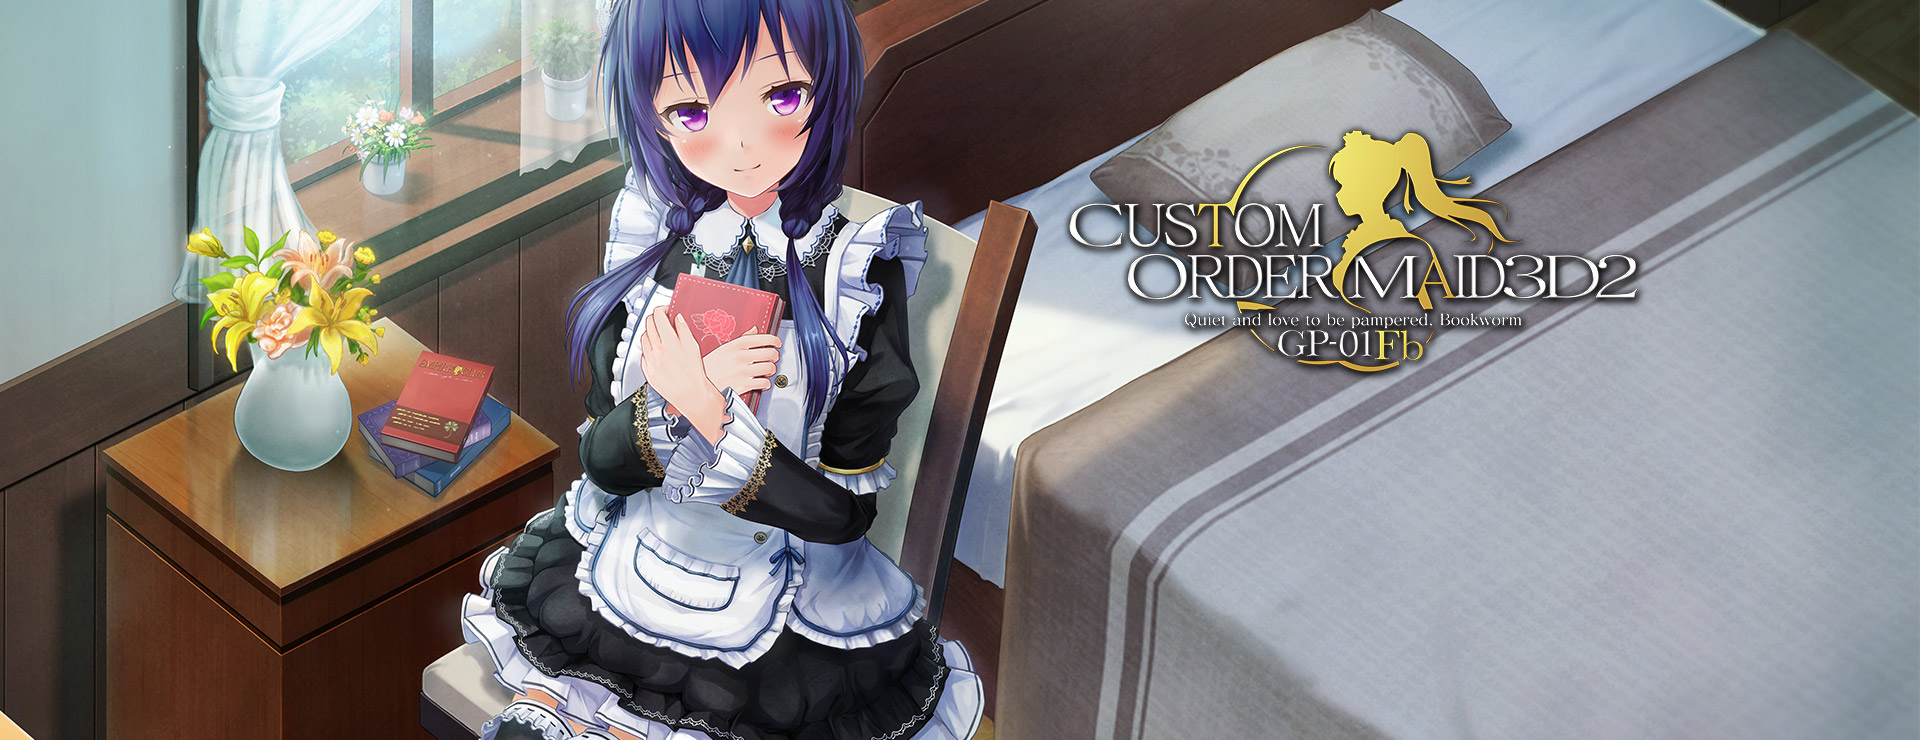 Custom Order Maid 3D2 - Quiet and love to be pampered Bookworm GP-01Fb DLC - シミュレーション ゲーム